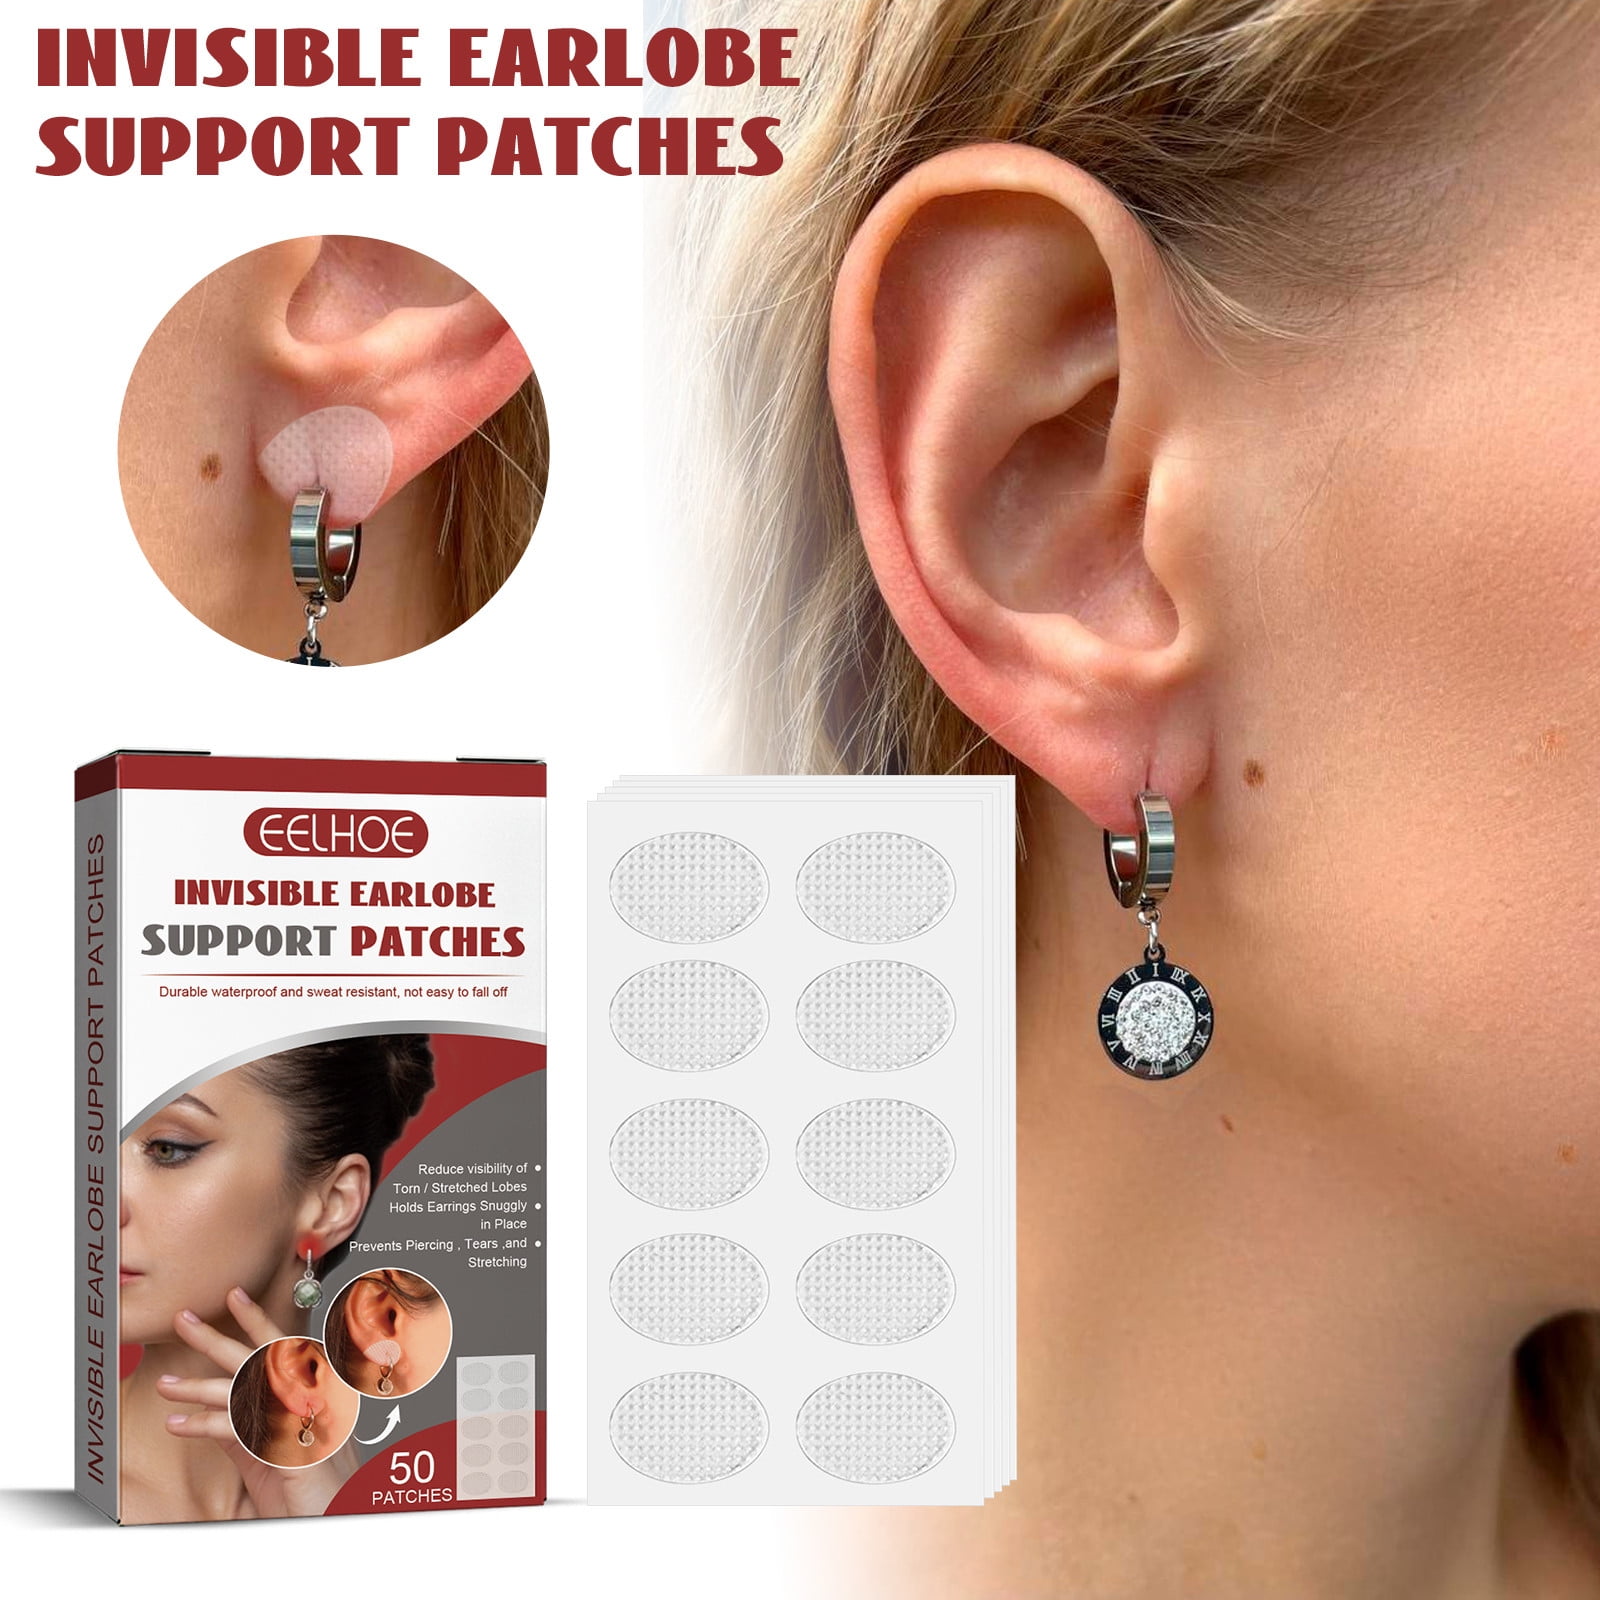 Yifudd Beauty Tool,Invisible Earlobe Support Patches,Clear Earring Support Patches,Earring Backs for Droopy Ears,Ear Care Products for Stretched Ear